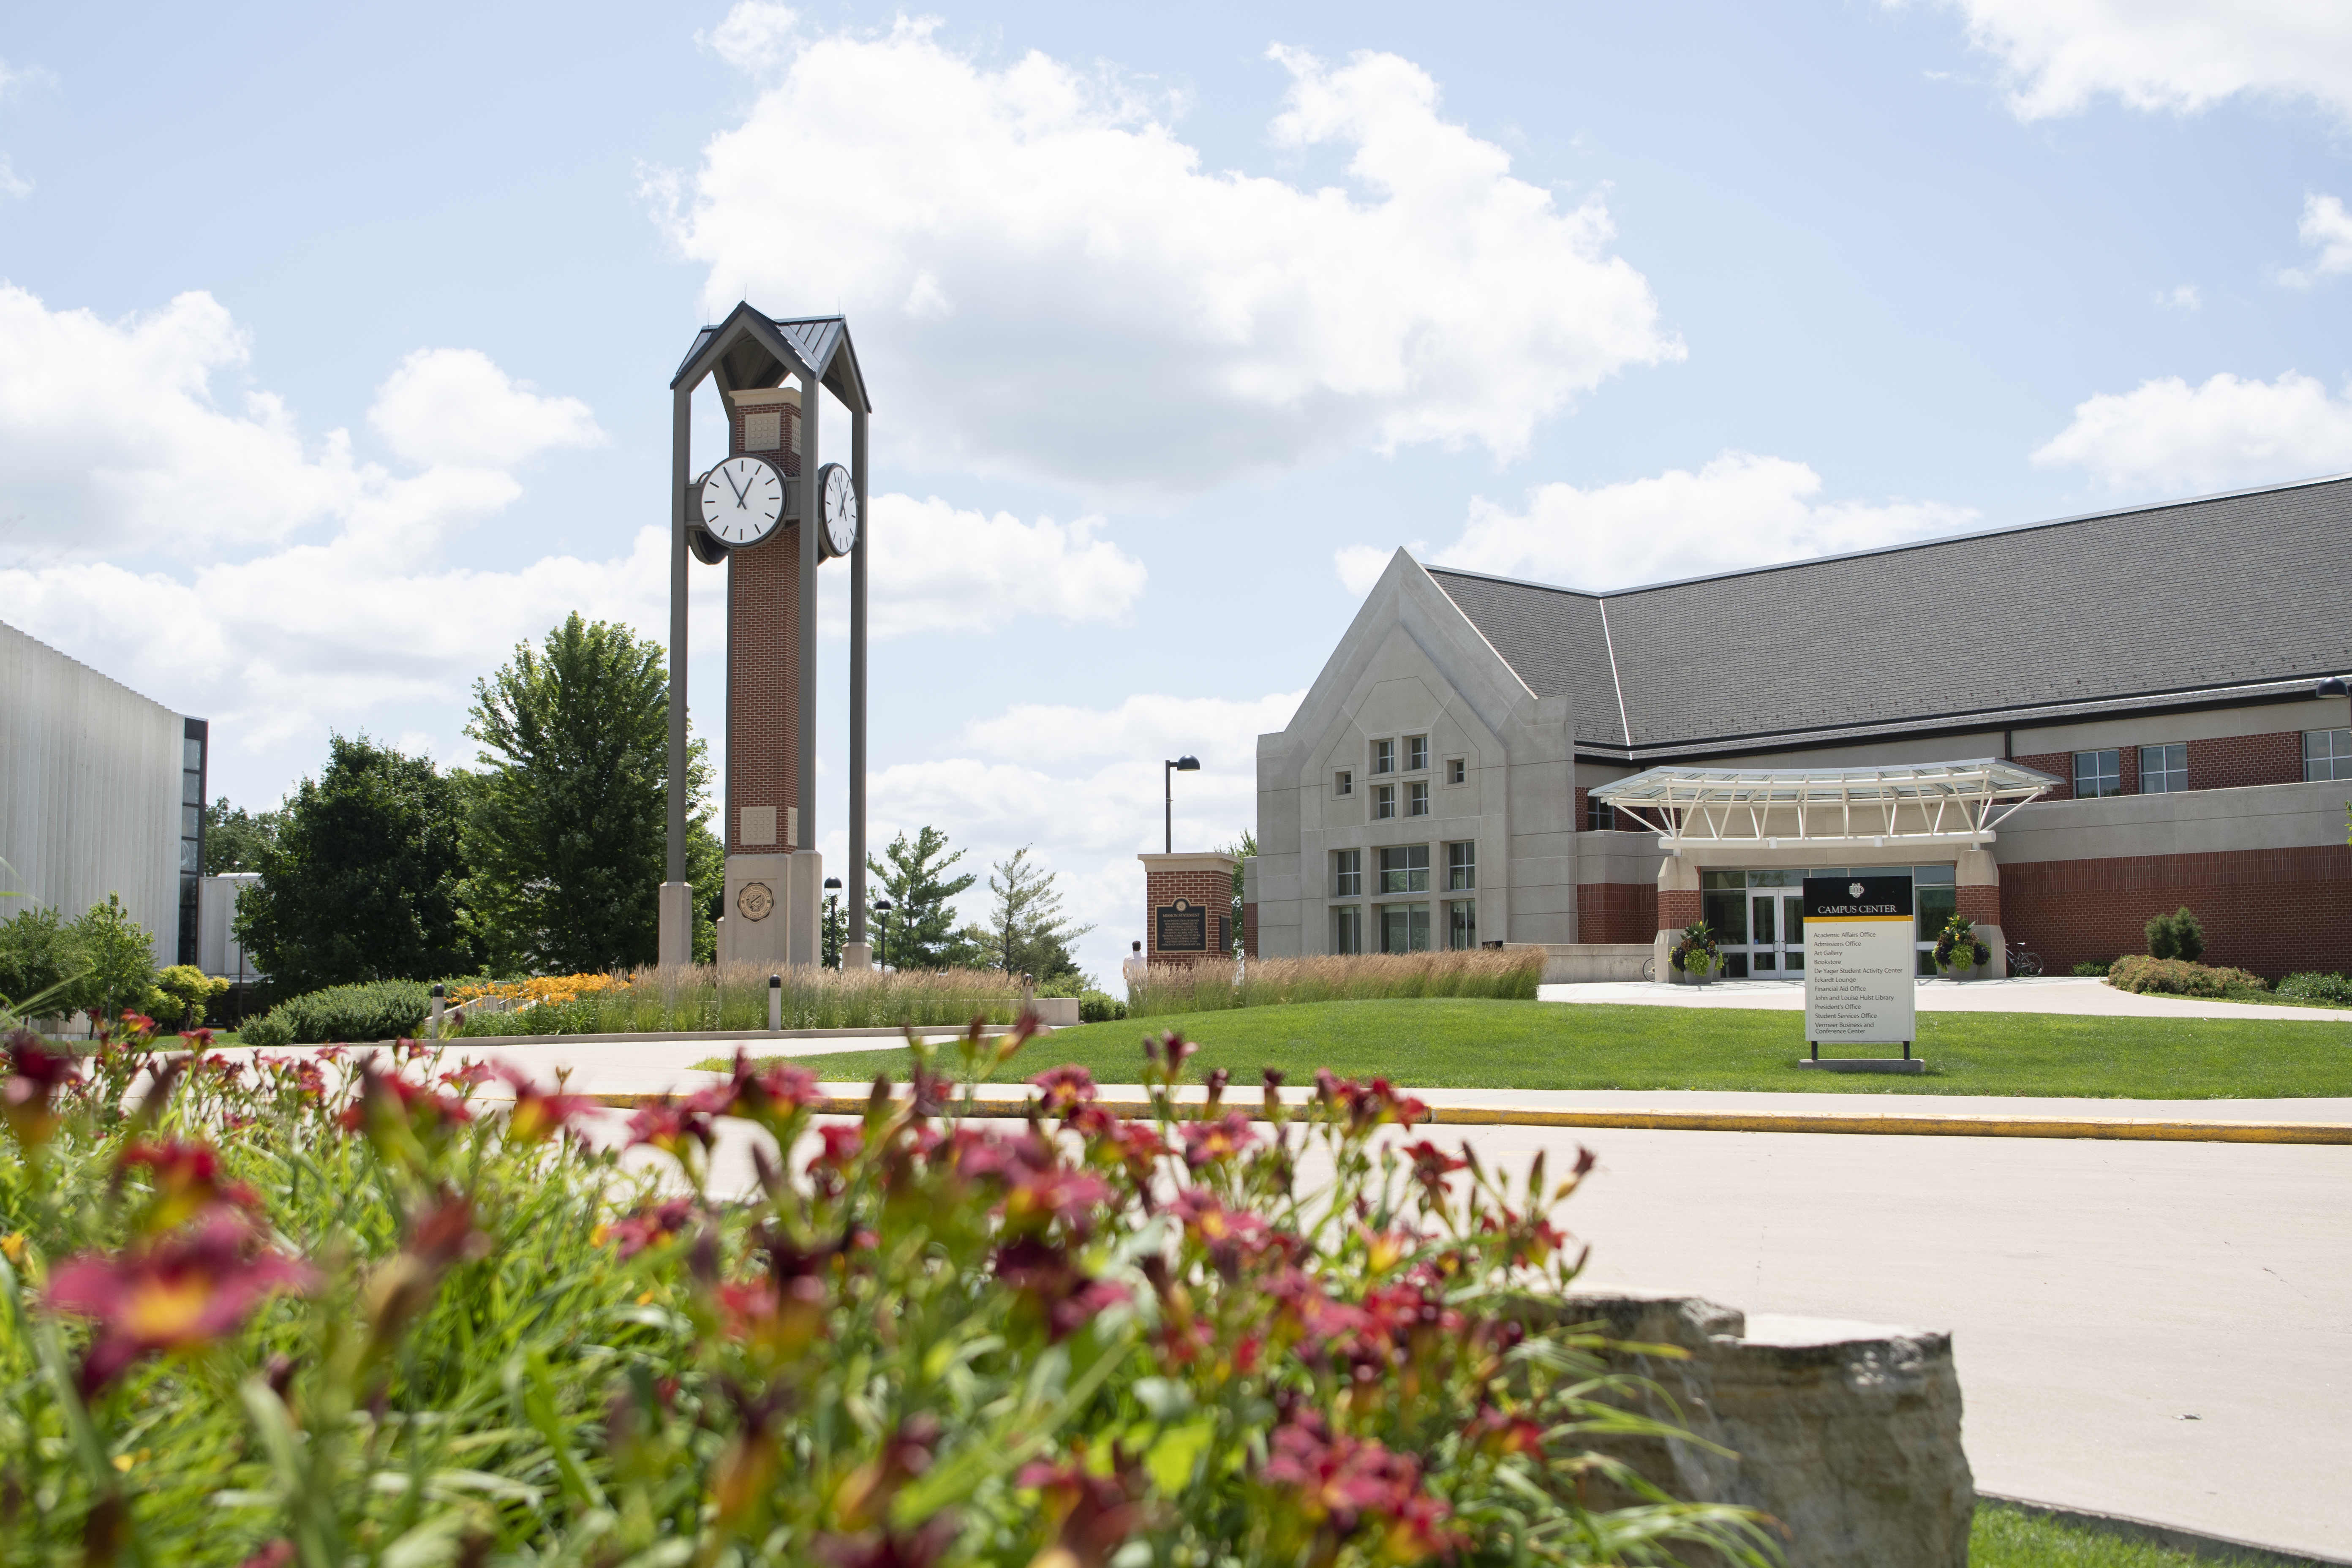 A view of Dordt's clocktower and campus center with flowers in the foreground.